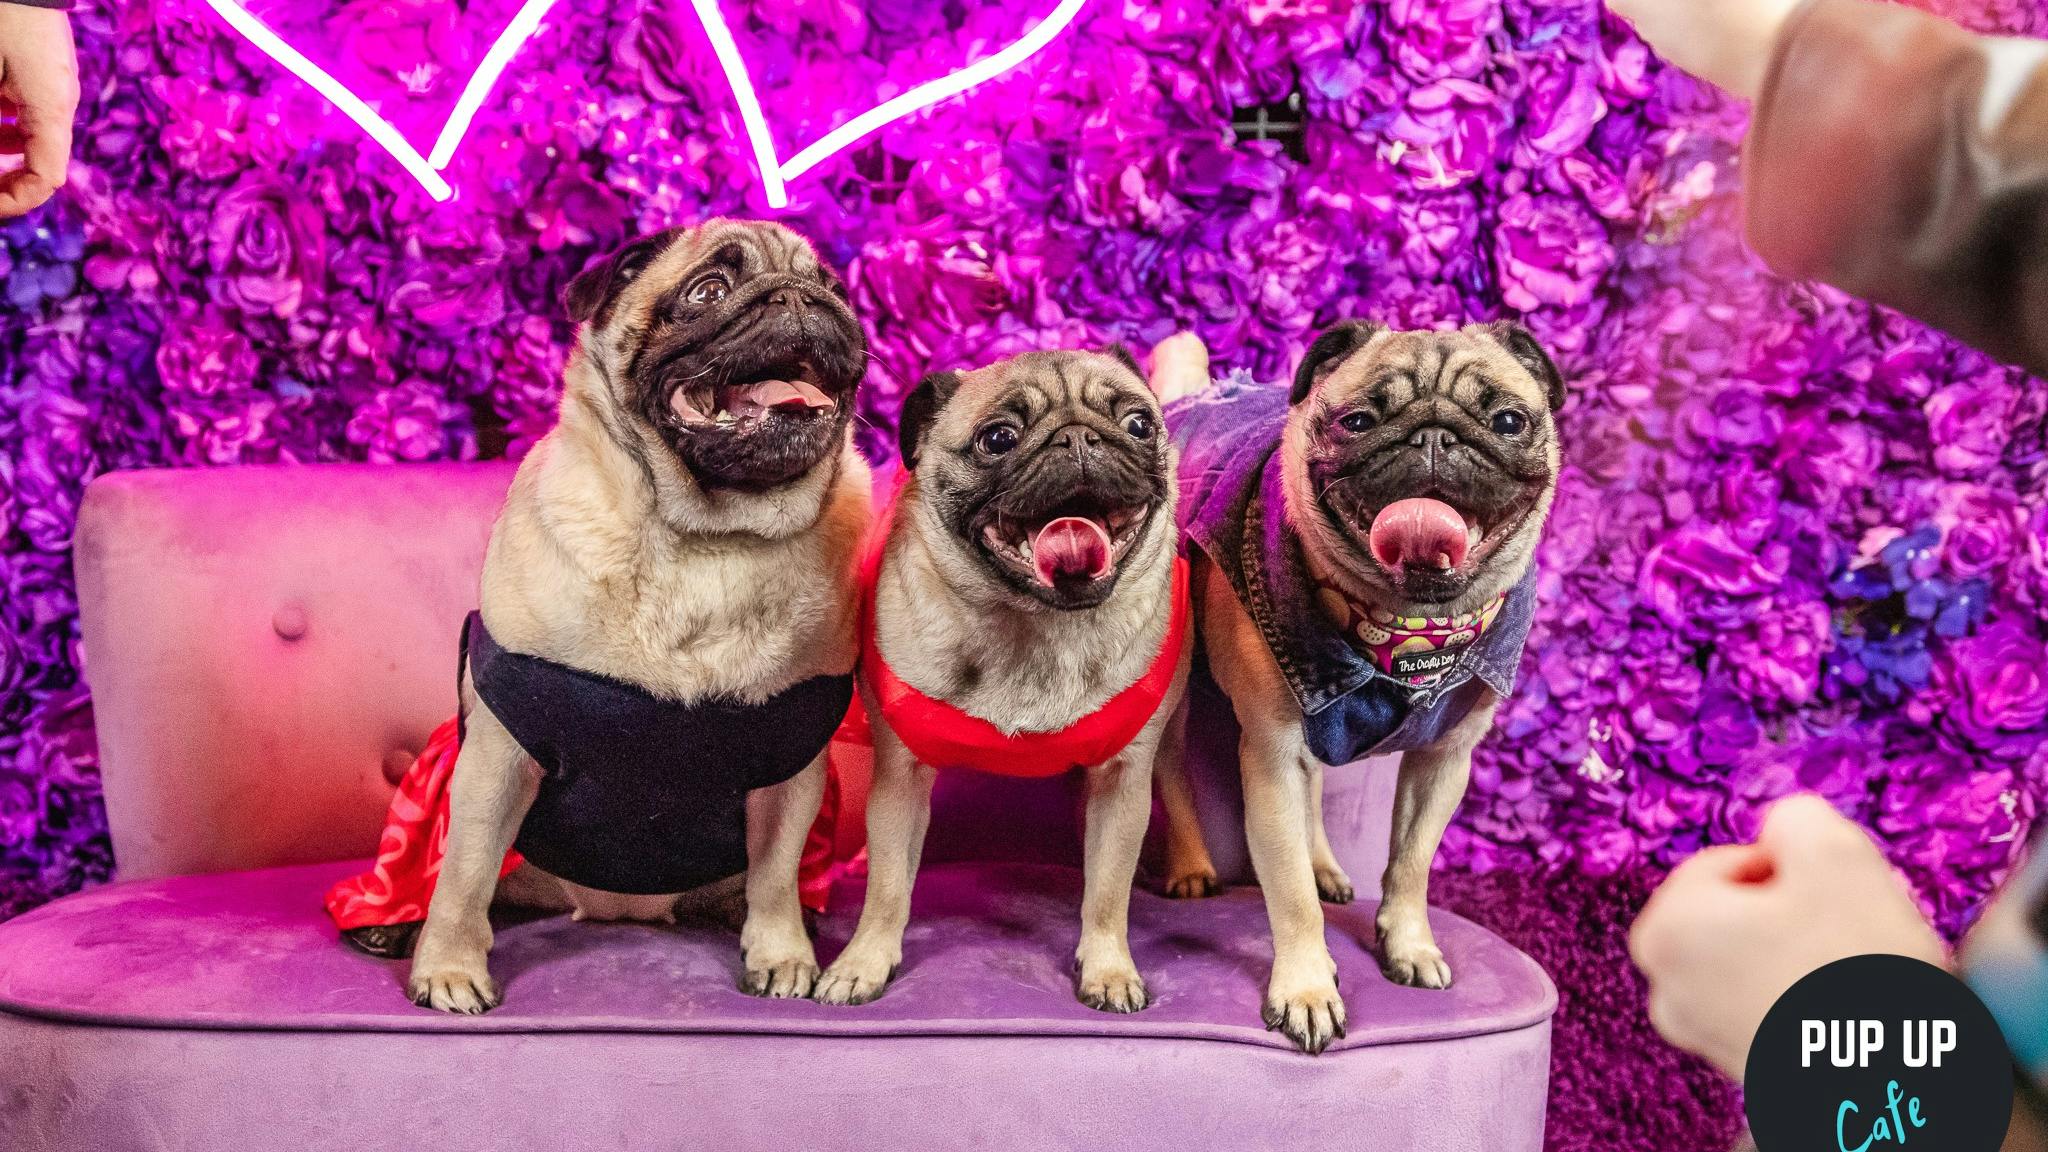 Pup Up Café comes to Revolution Southampton for Valentine’s Day